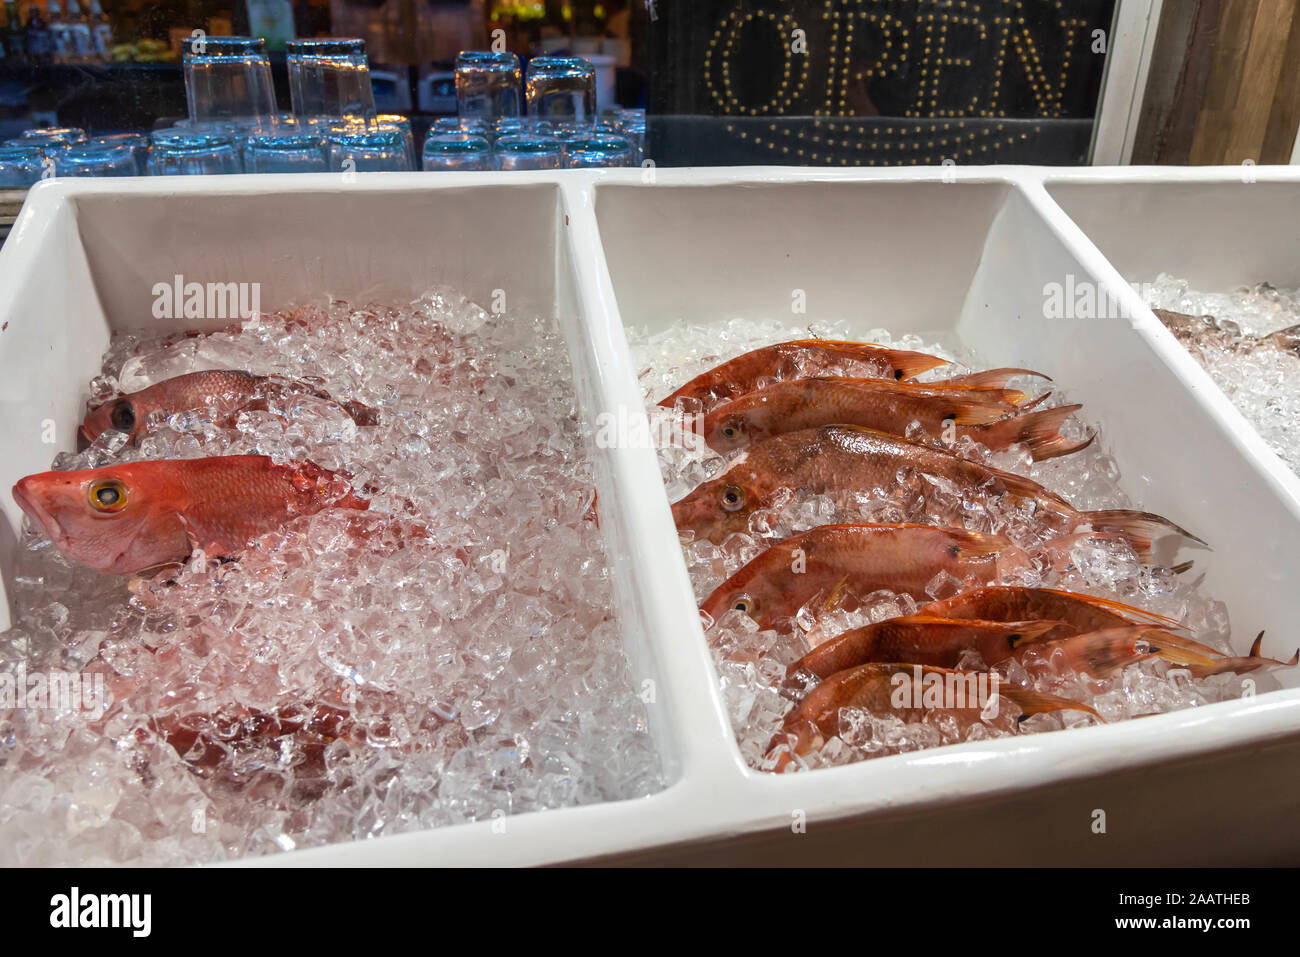 Fresh fish, straight off the boat, hogfish and red snapper pictured, displayed in the ice tub in front of a local Belizean restaurant in San Pedro . Stock Photo